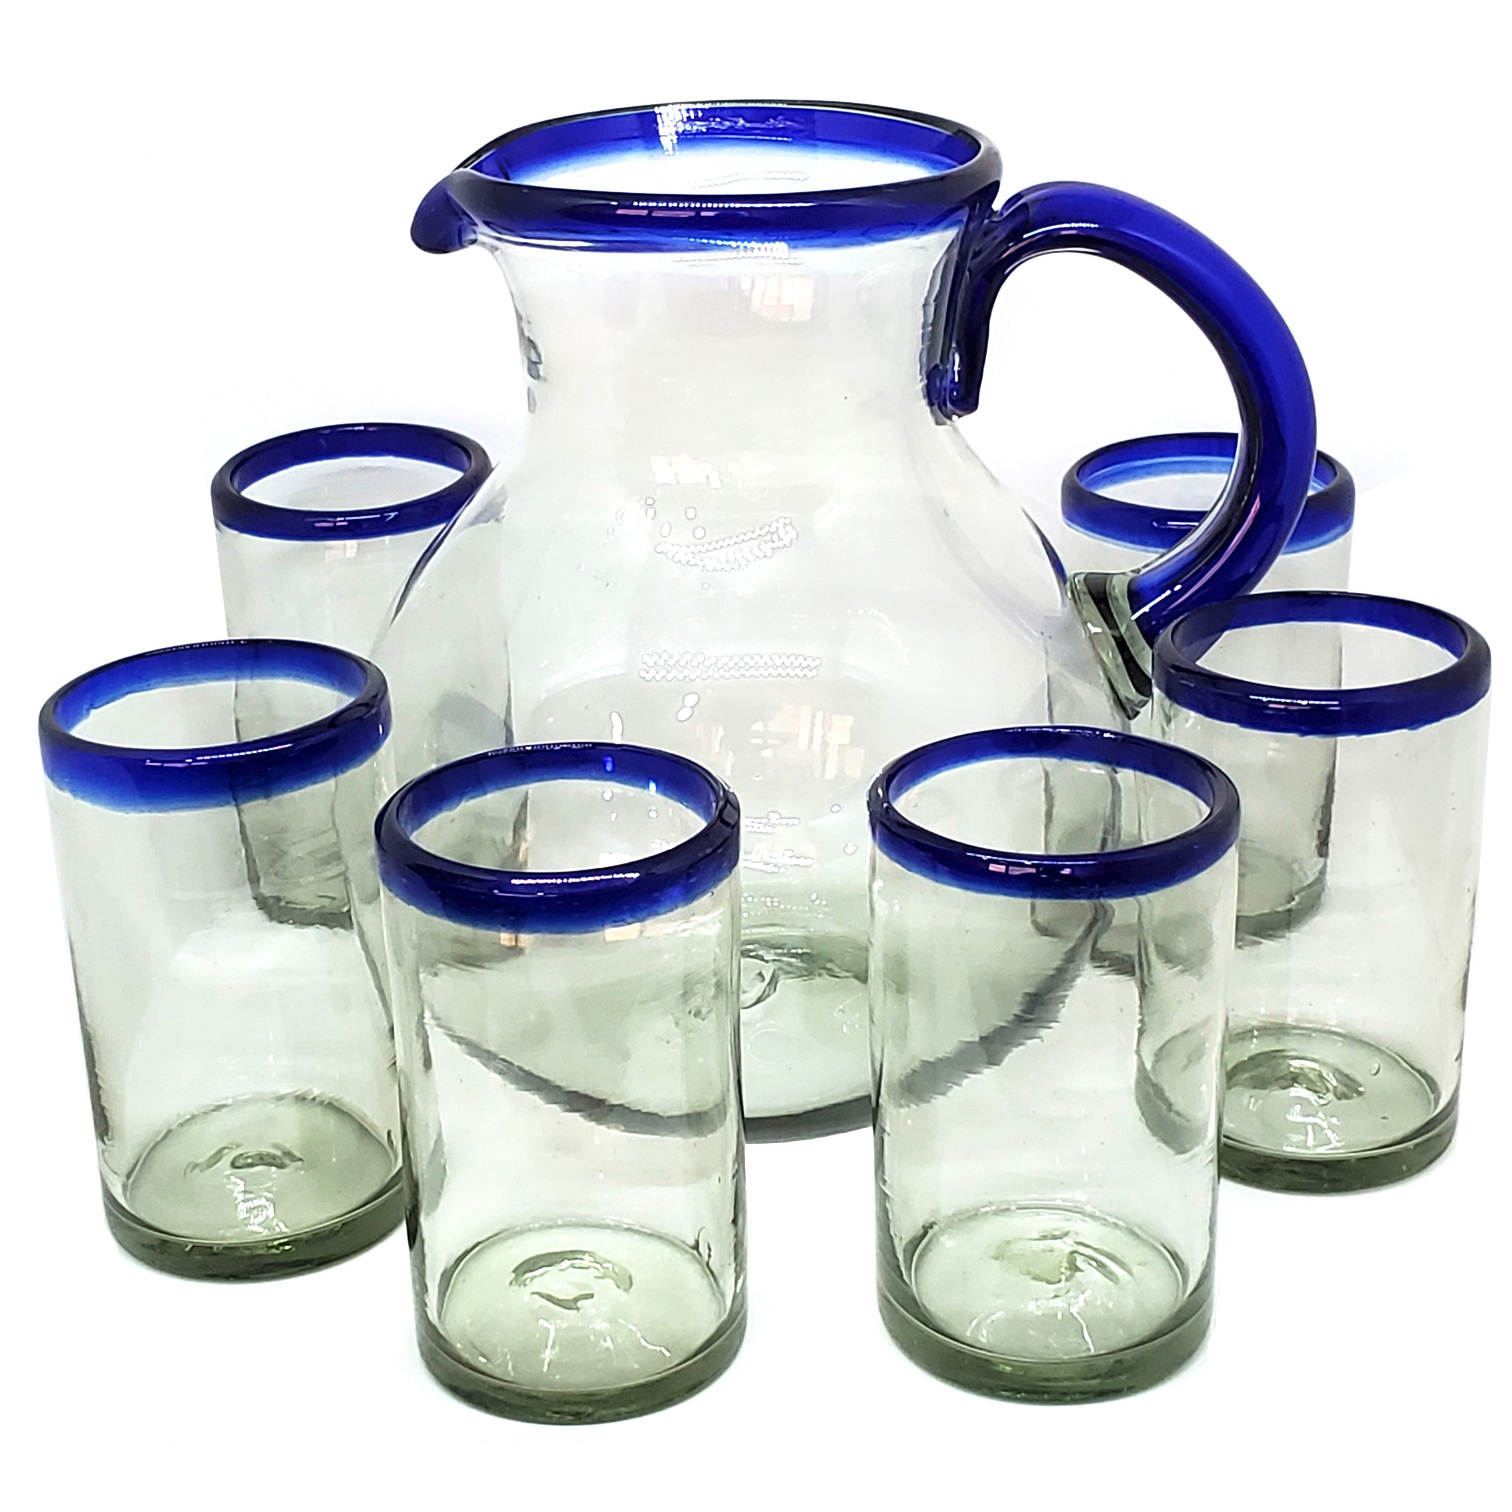 Colored Rim Glassware / Cobalt Blue Rim 120 oz Pitcher and 6 Drinking Glasses set / Bordered in beautiful cobalt blue, this classic pitcher and glasses set will bring a colorful touch to your table.